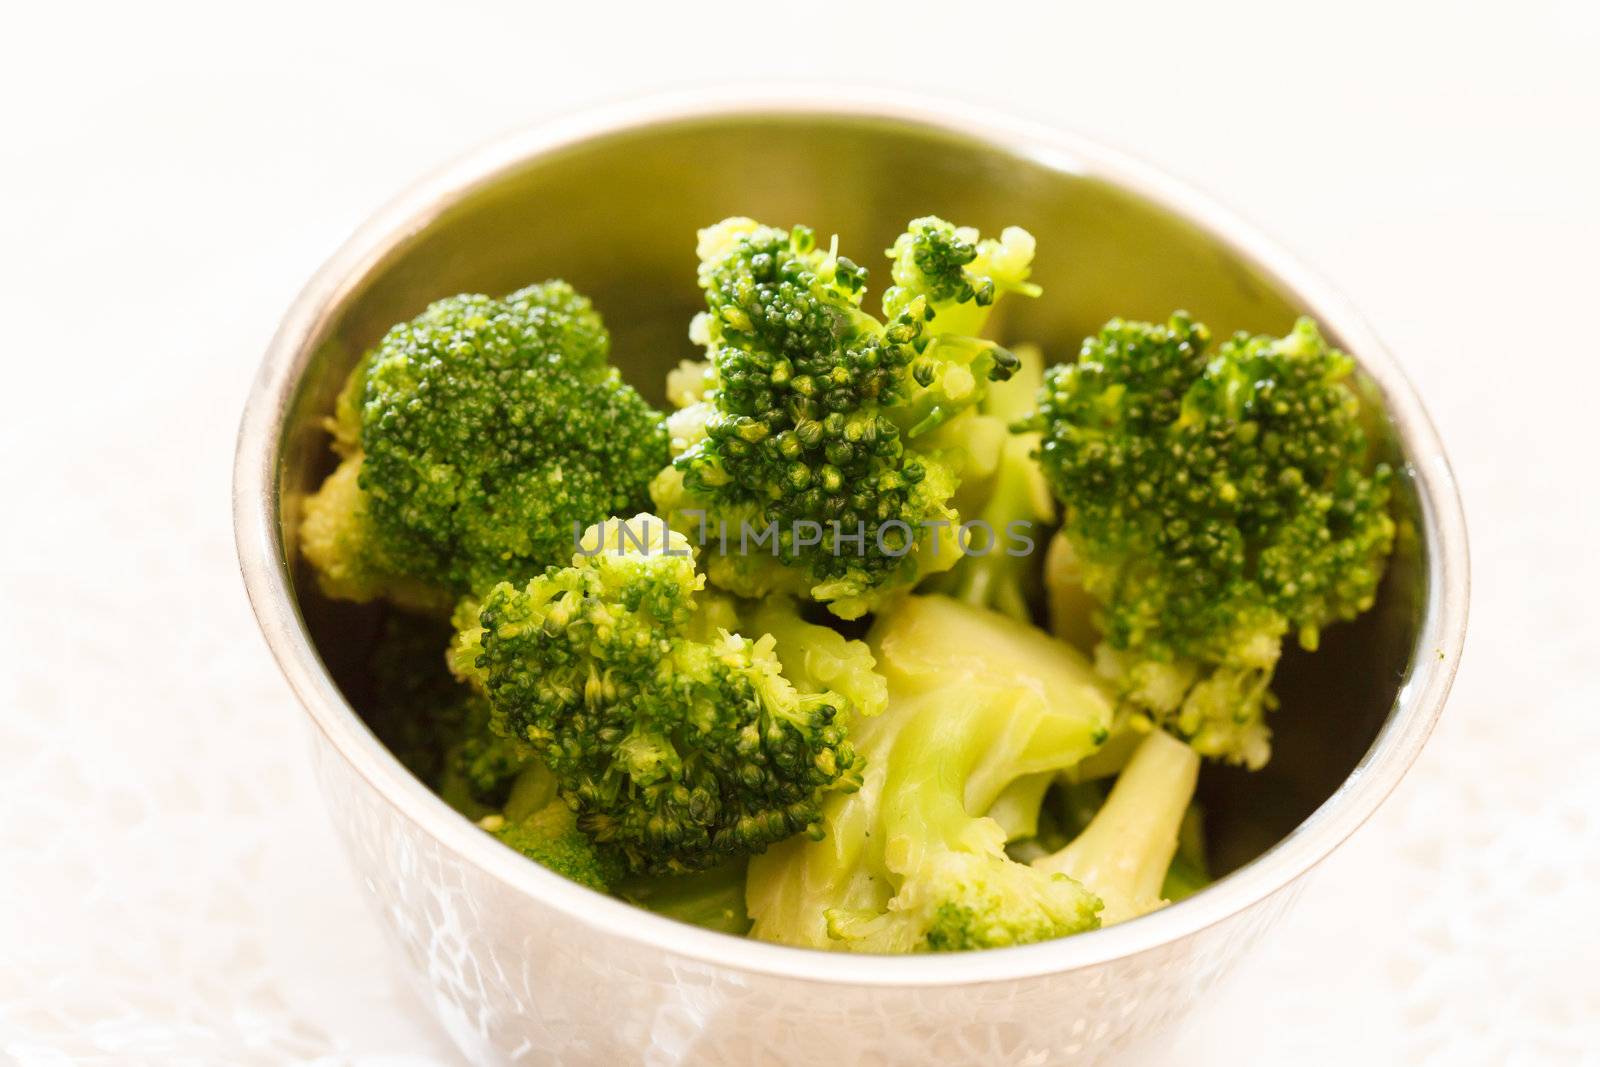 Steamed broccoli in a bowl  by shebeko